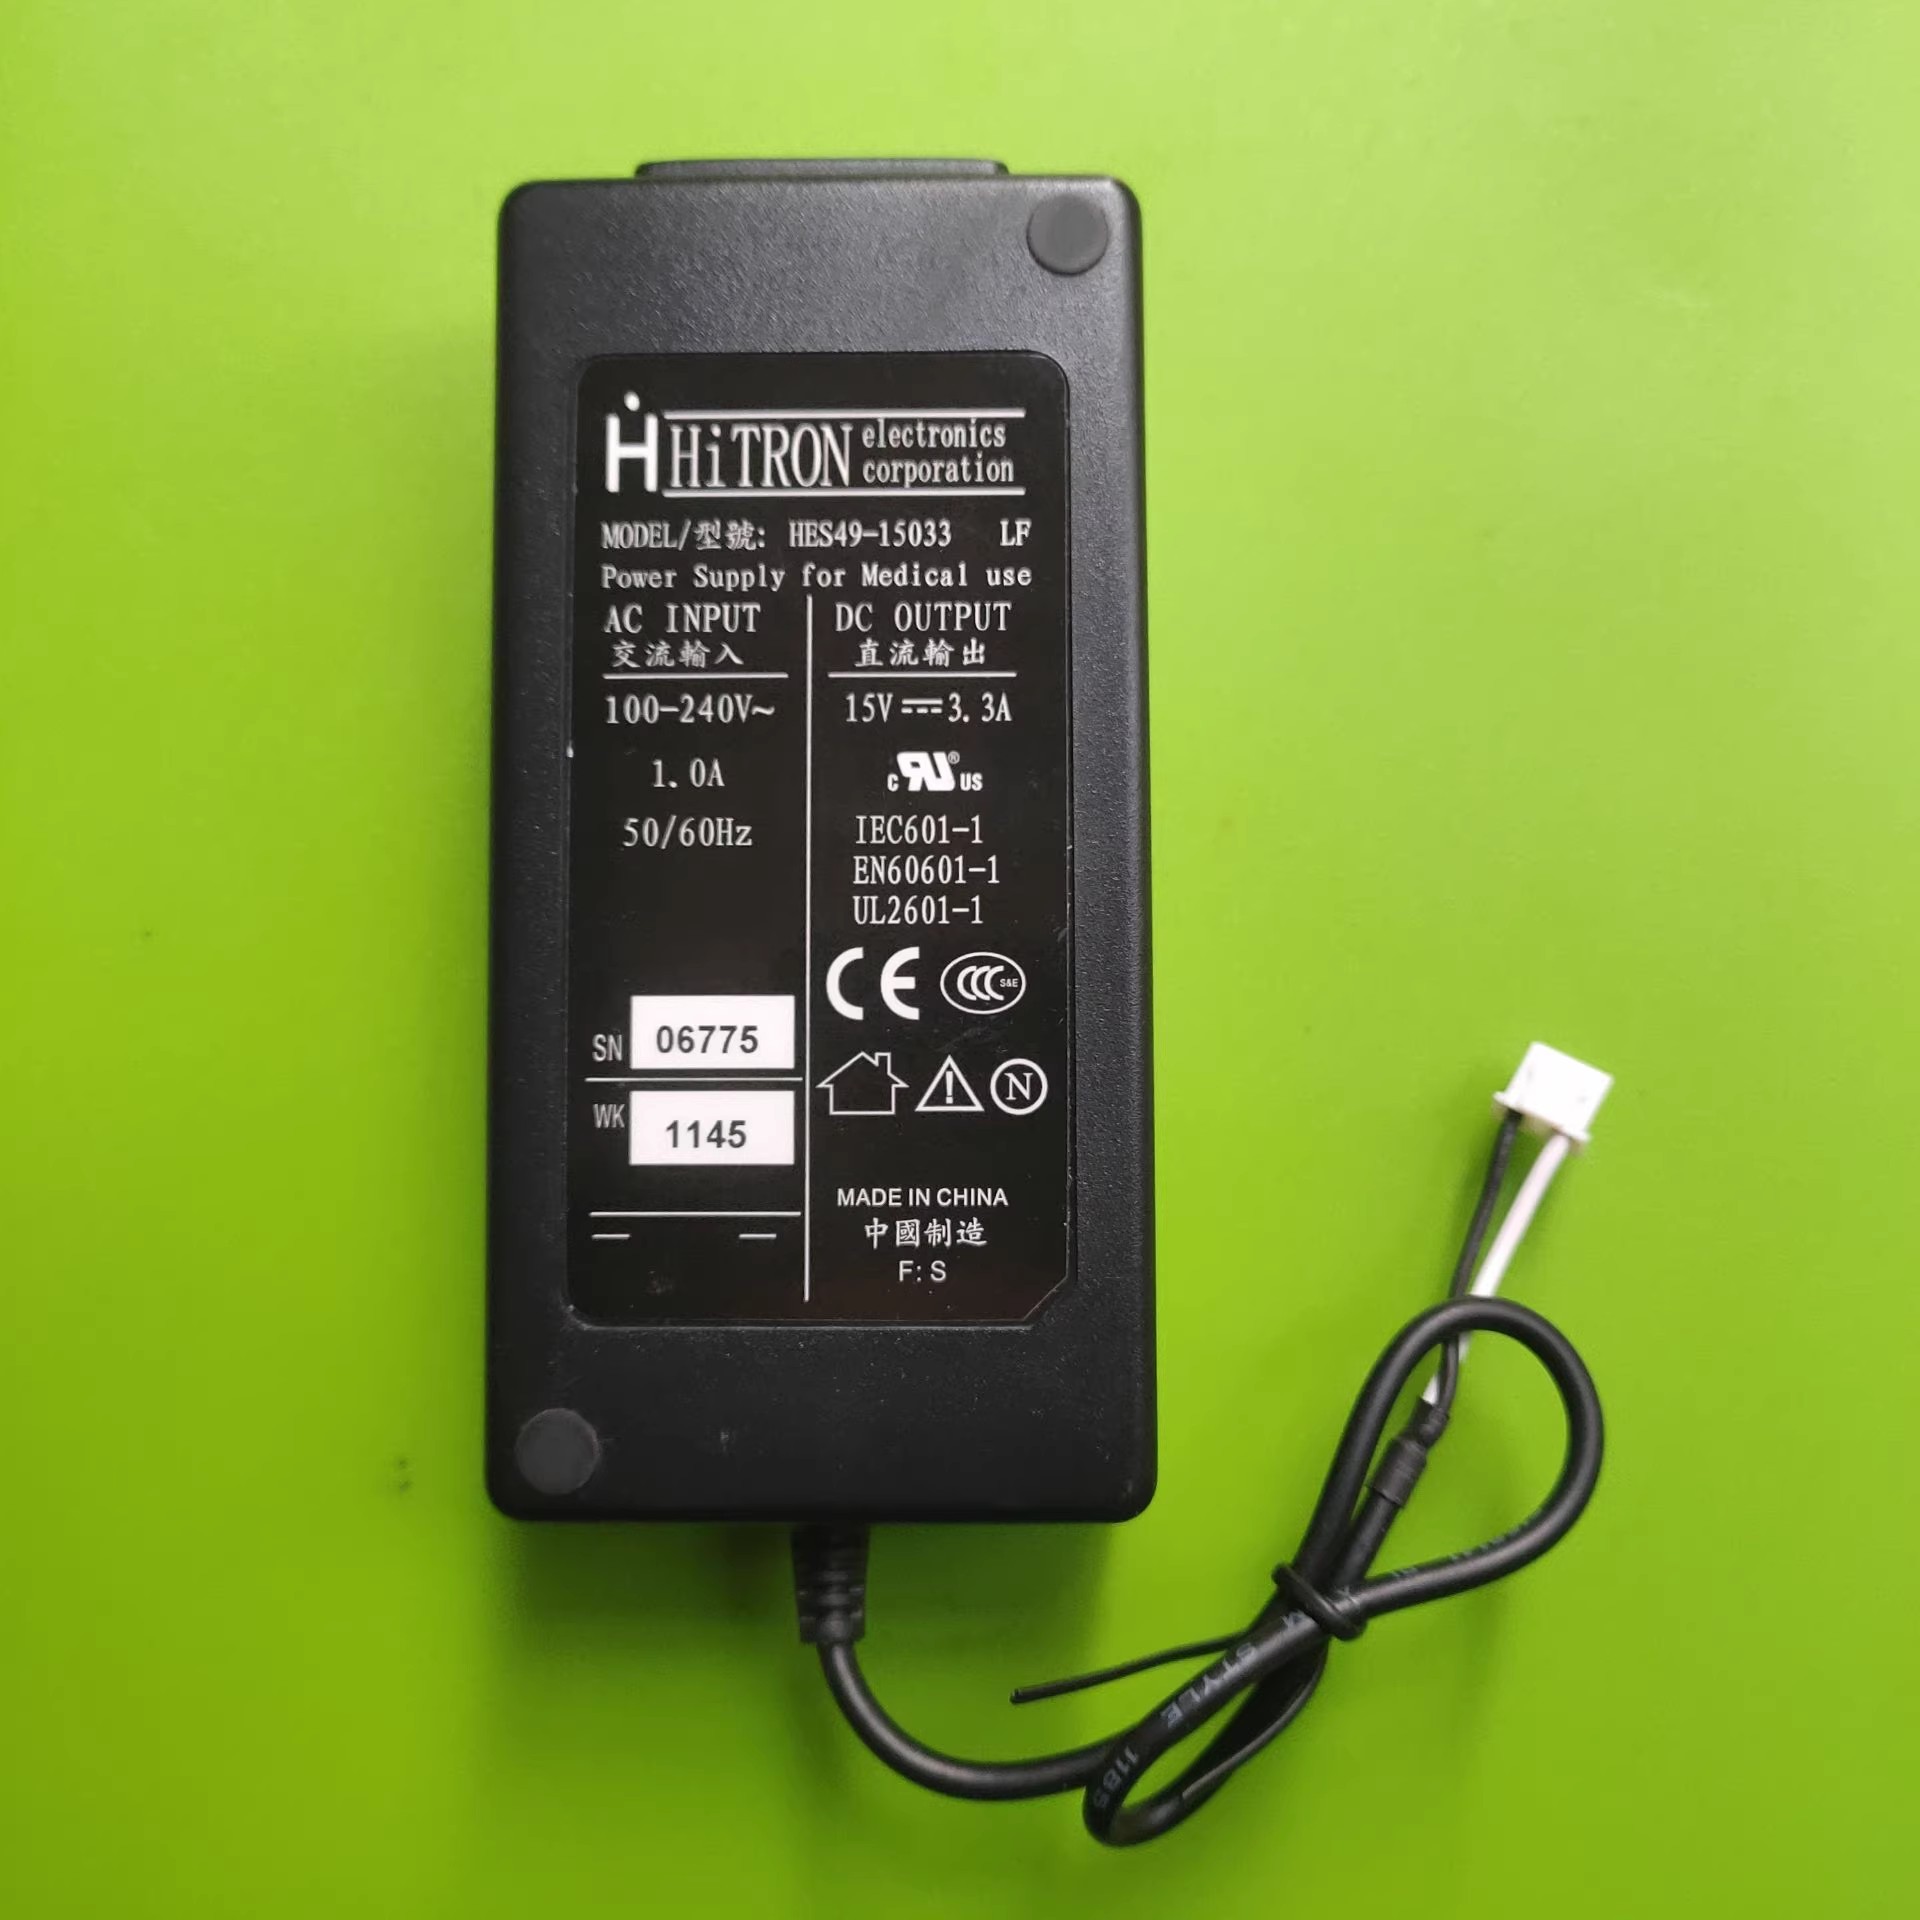 *Brand NEW* hes49-15033 hitron 15V 3.3A AC DC ADAPTHE POWER Supply